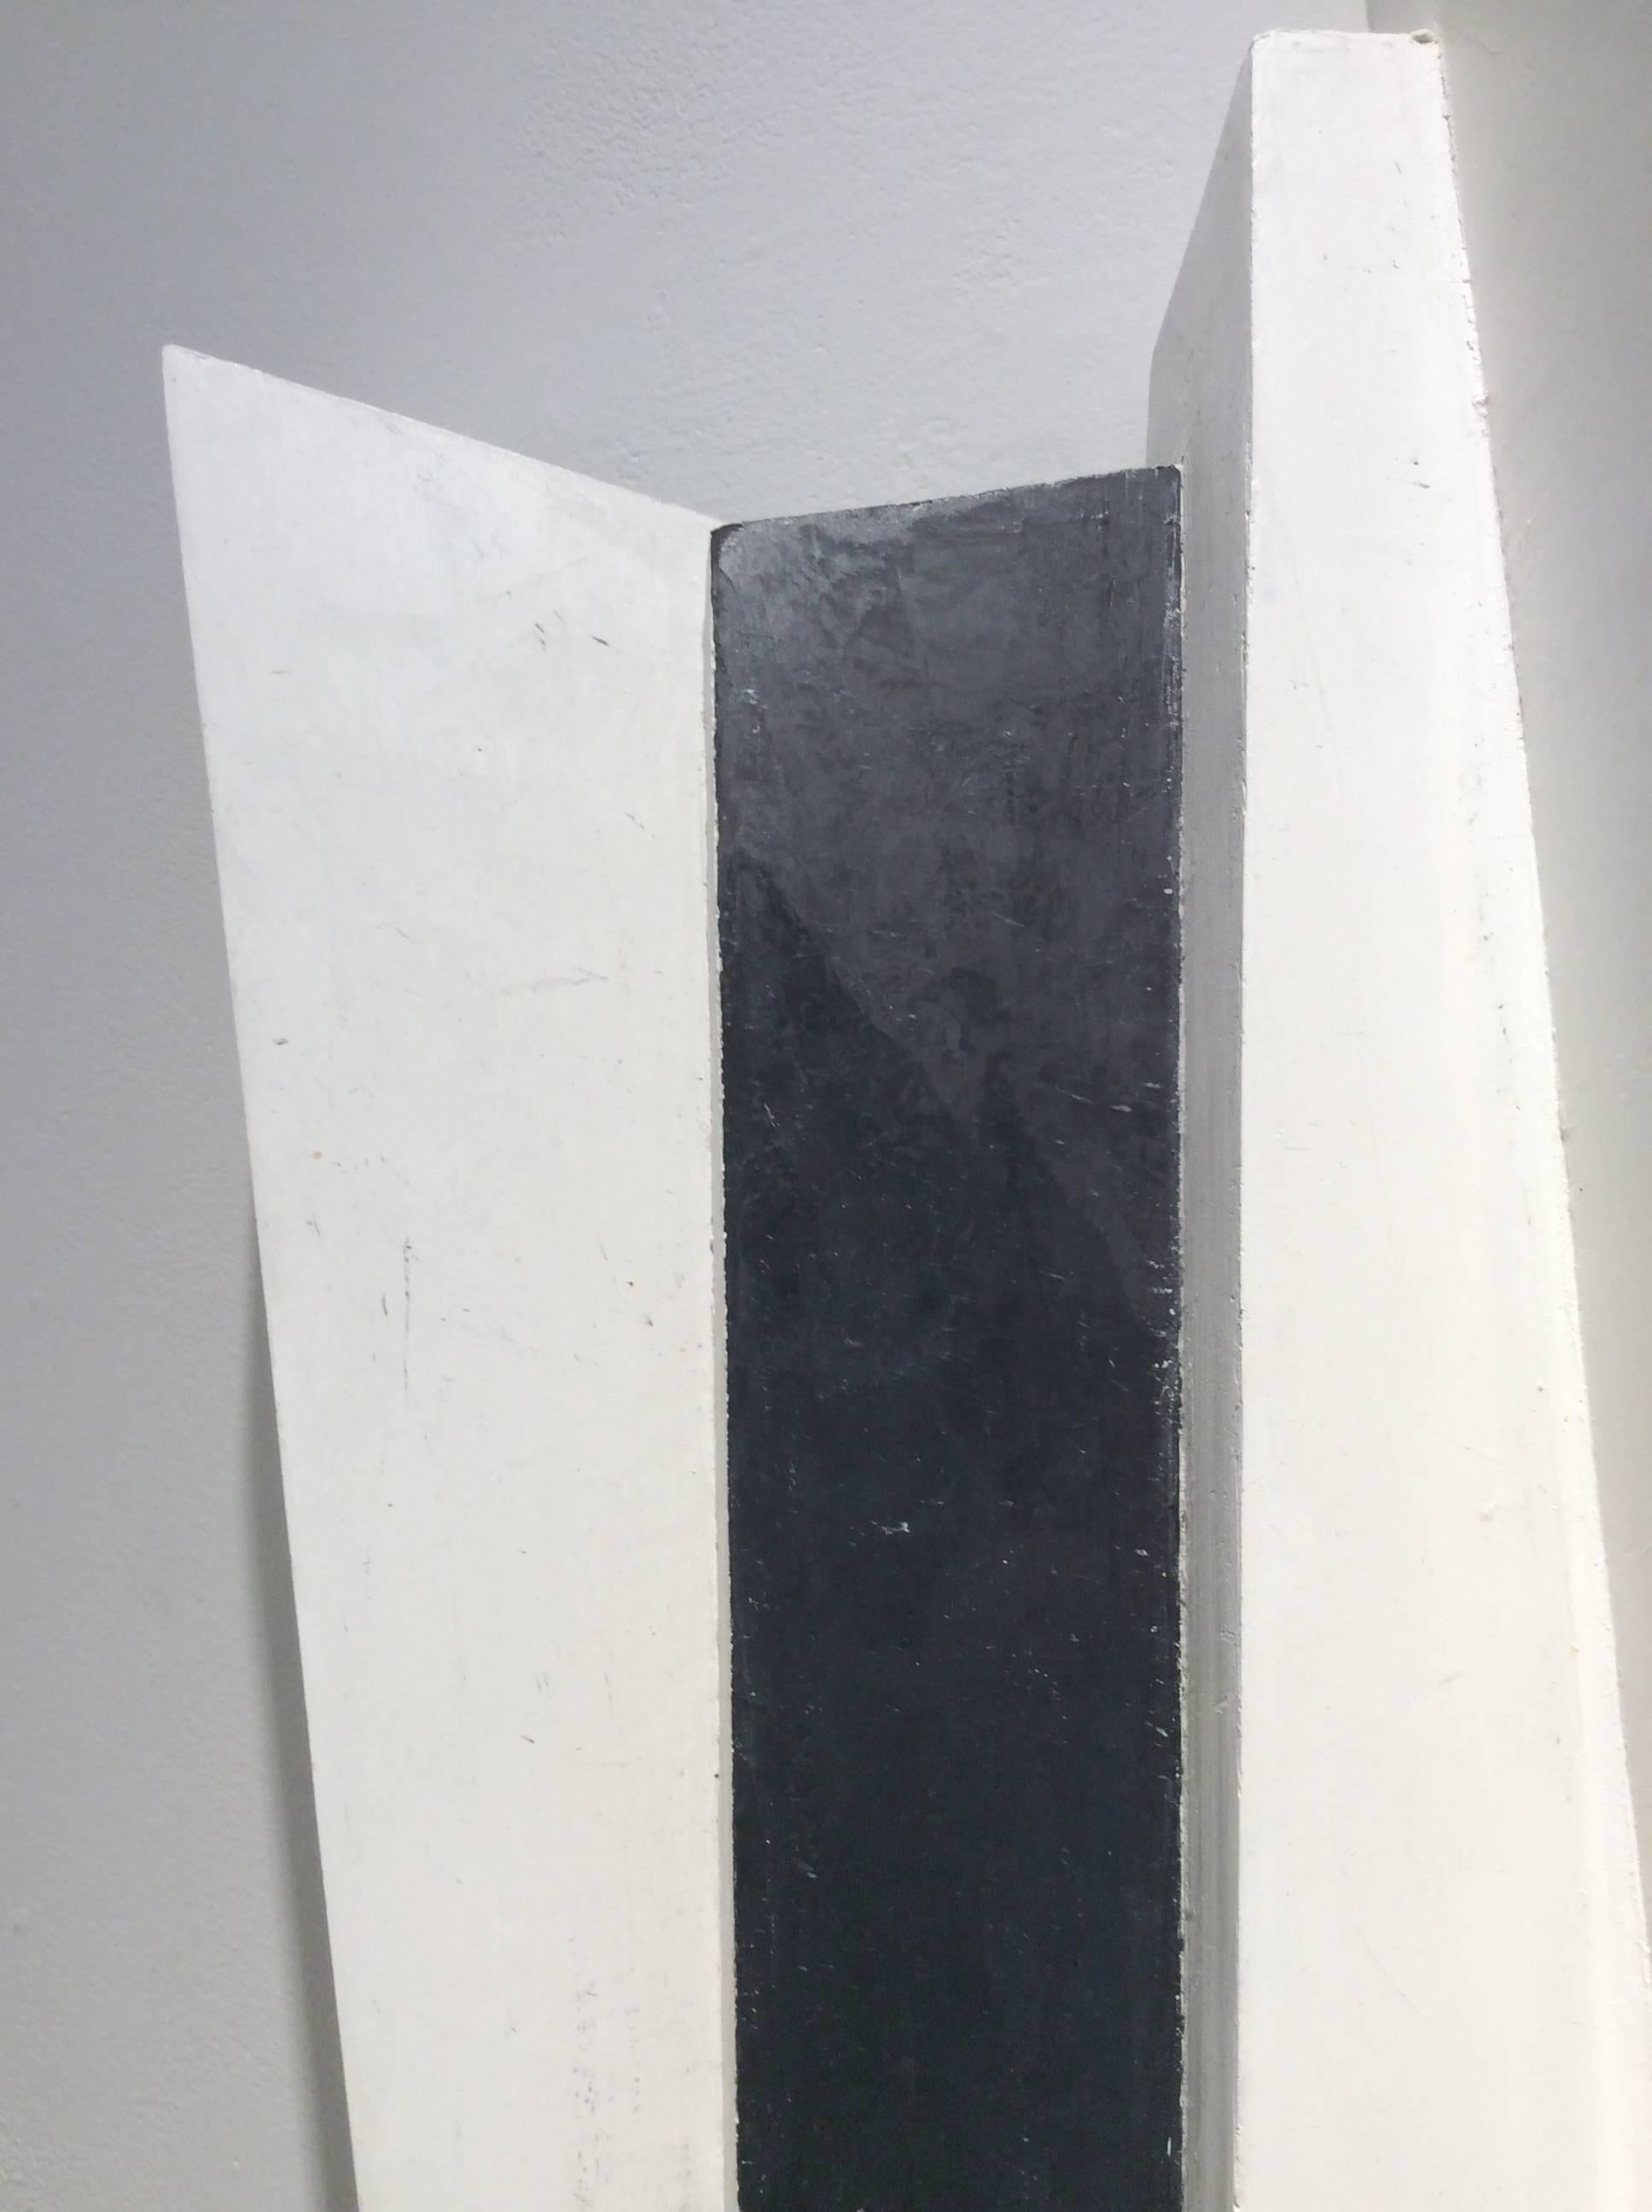 27 x 33 x 9
carved precision board & Venetian plaster 

This contemporary, abstract minimalist wall sculpture was made by Japanese artist, Dai Ban in 2016. The elegant minimalist wall sculpture is incredibly lightweight and has a thin surface